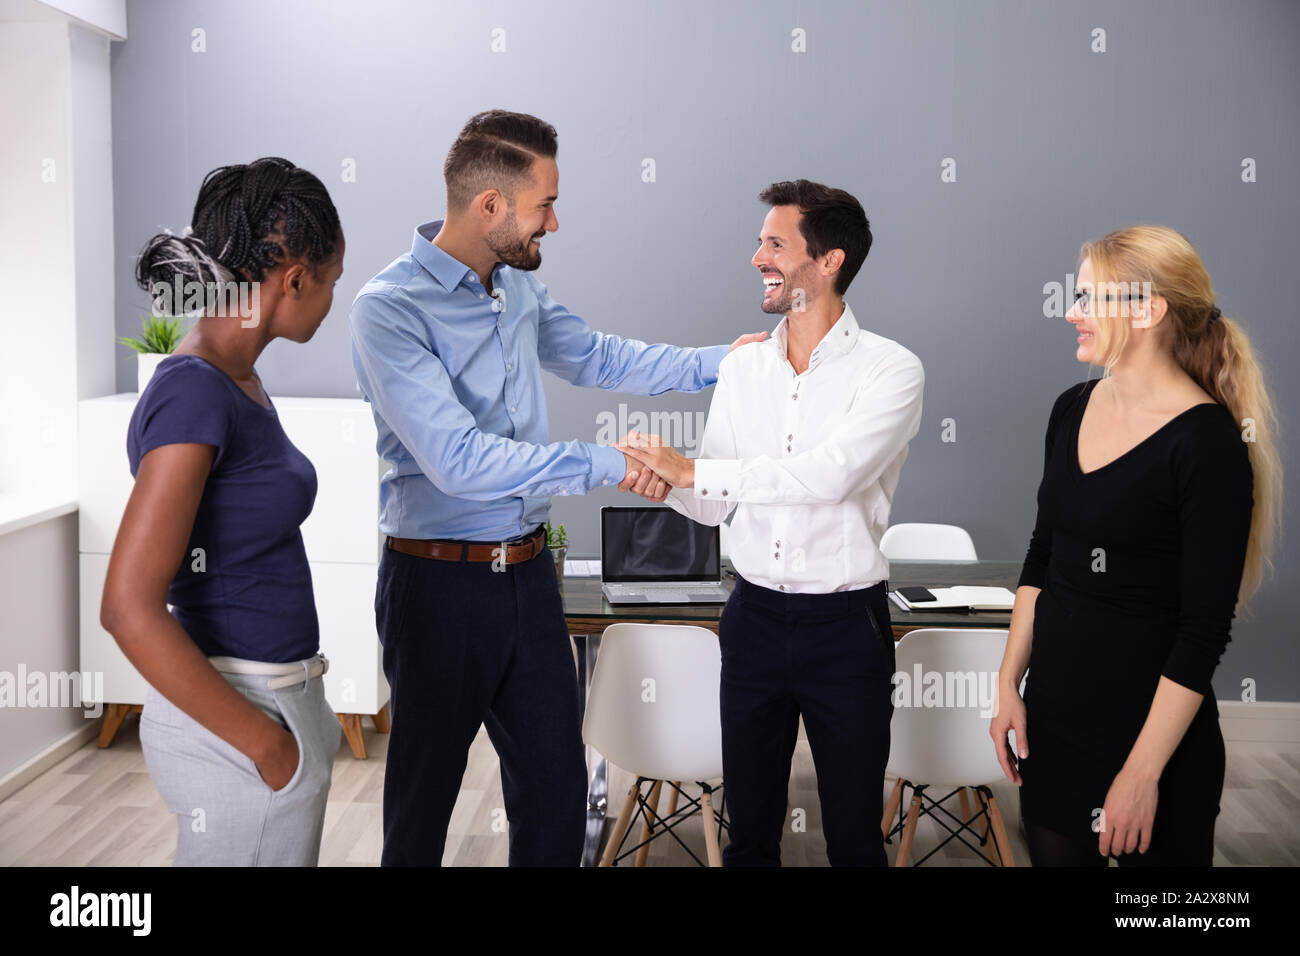 Women Looking At Happy Young Business Men Shaking Hands In Meeting Room Stock Photo